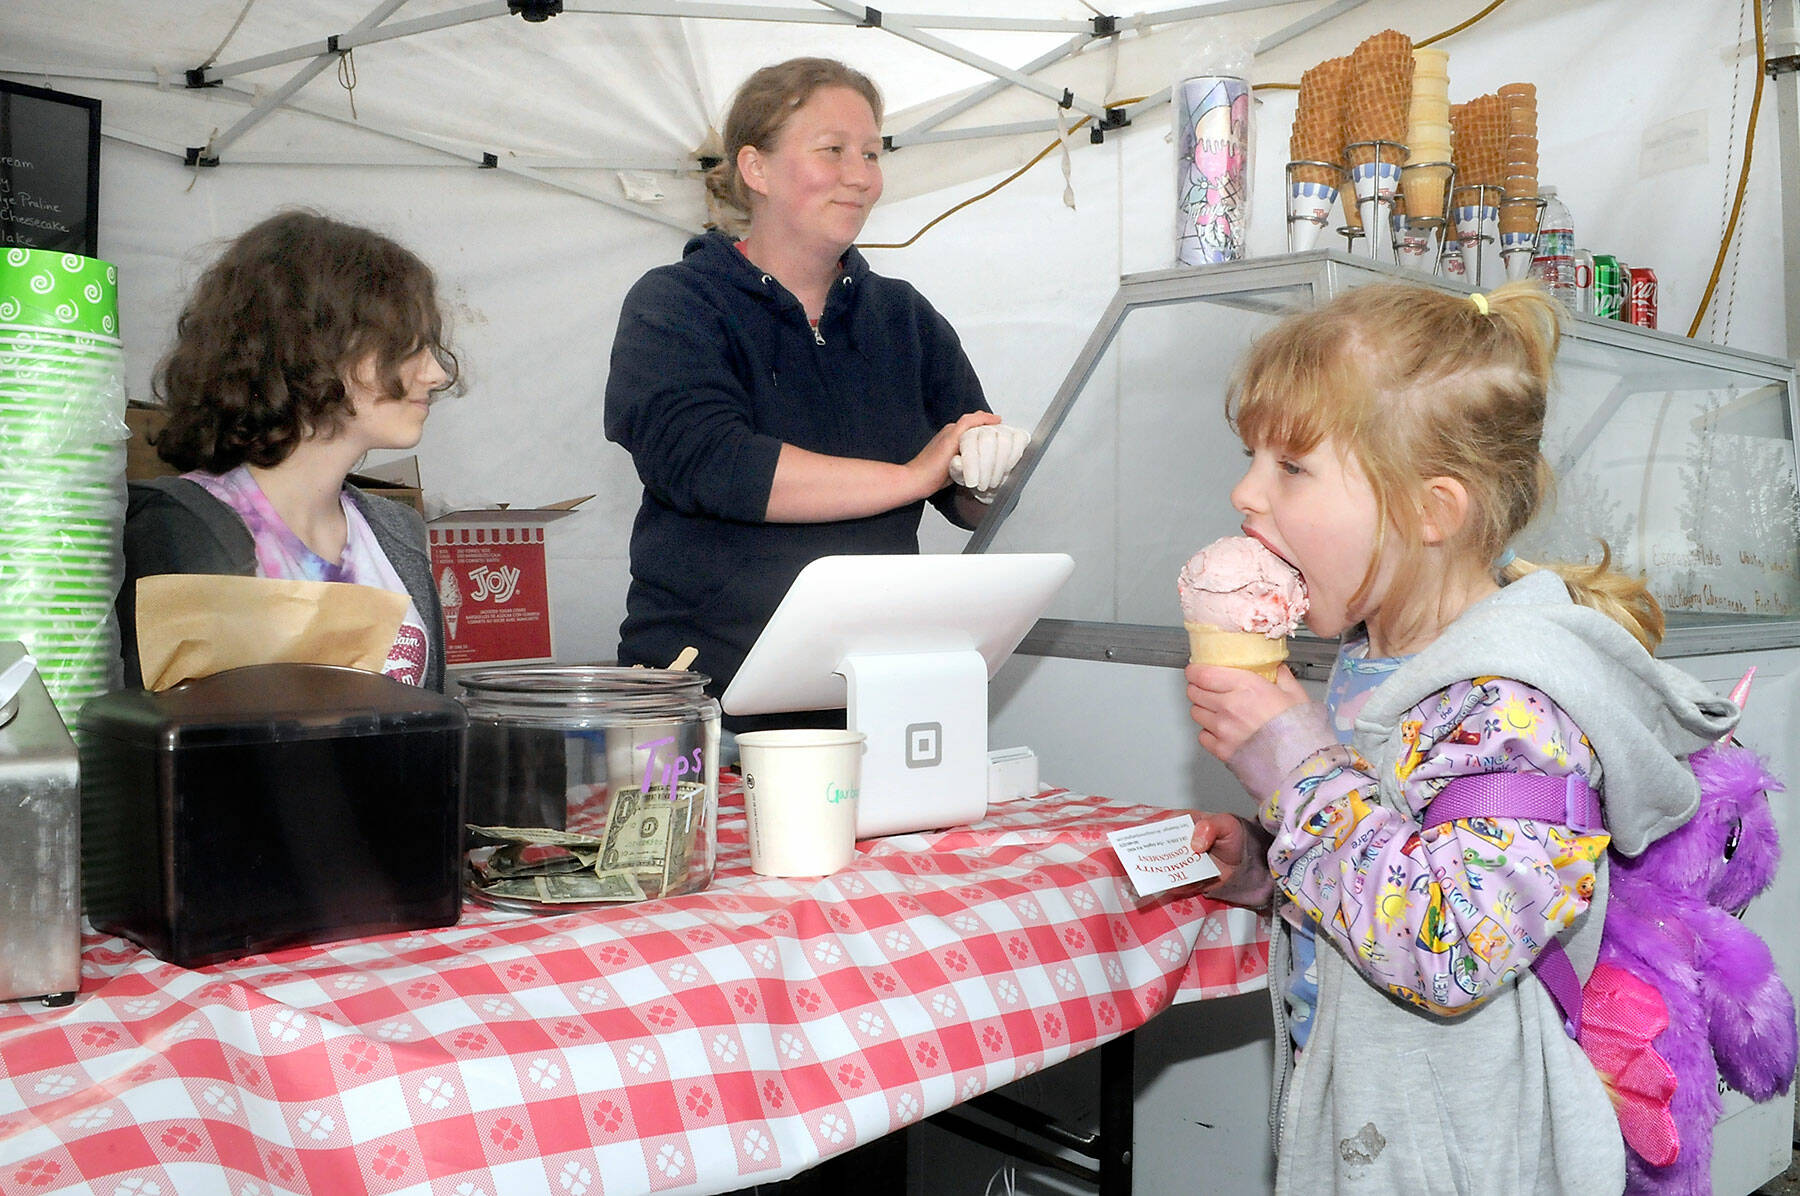 Alana Black, center, and her daughter, Sophia Strickland, 14, left, operate their Skokomish Valley-based Olympic Mountain Ice Cream tent while 5-year-old Evelyn Bonebreak of Port Angeles enjoys a cone on Friday at the Juan de Fuca Festival of the Arts in Port Angeles. (Keith Thorpe/Peninsula Daily News)